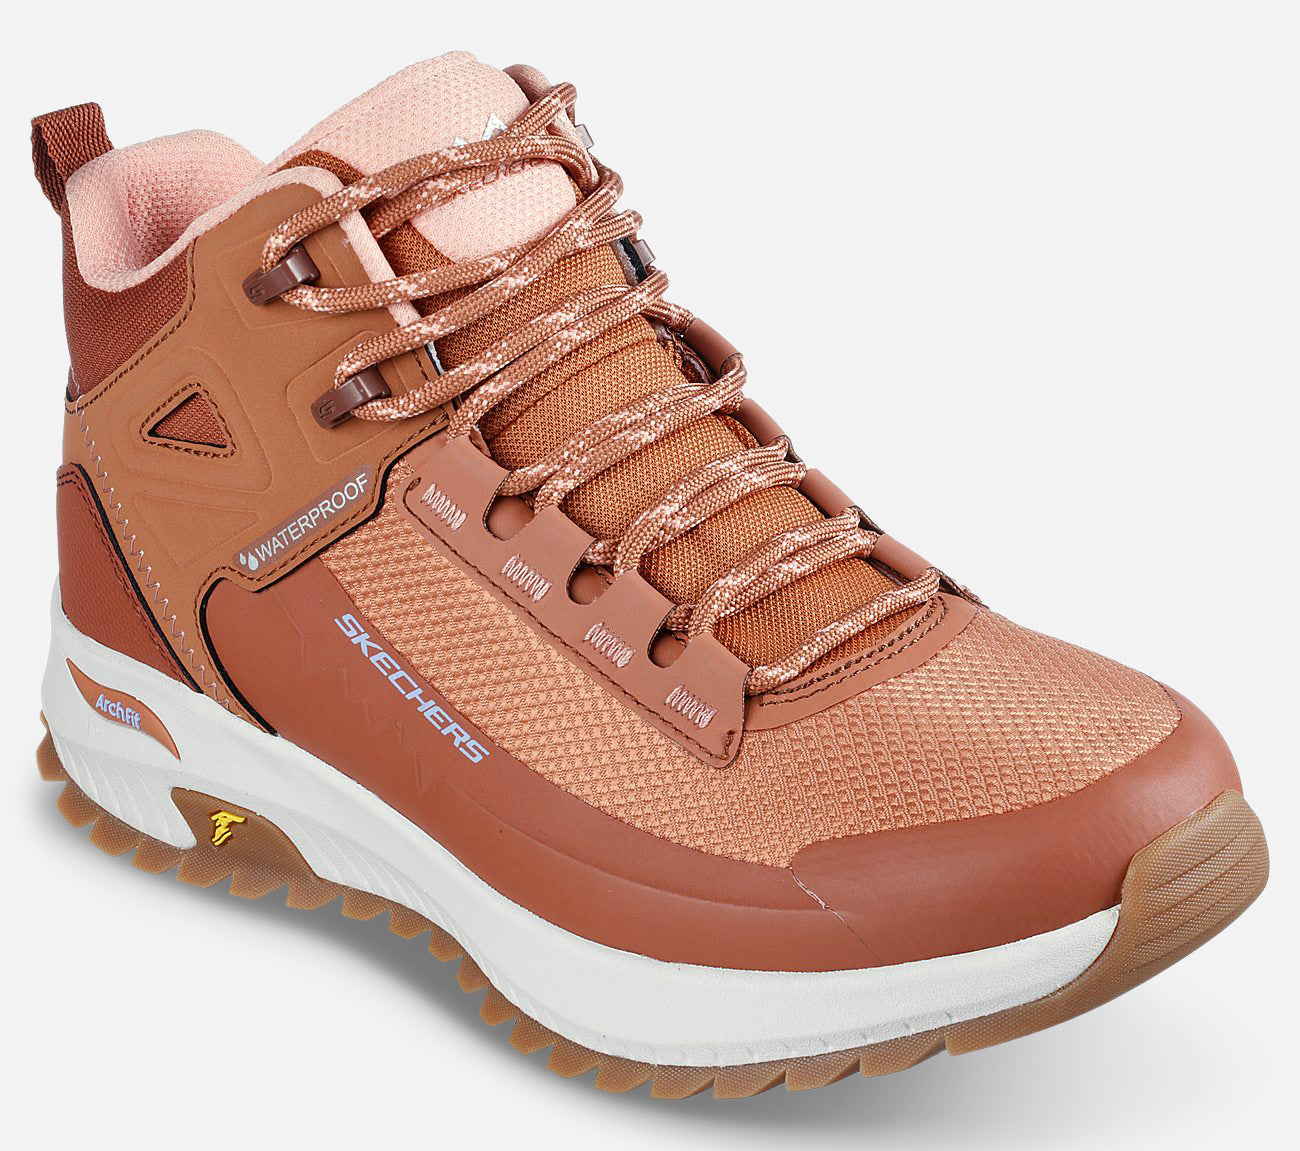 Arch Fit Discover - Waterproof Boot Skechers